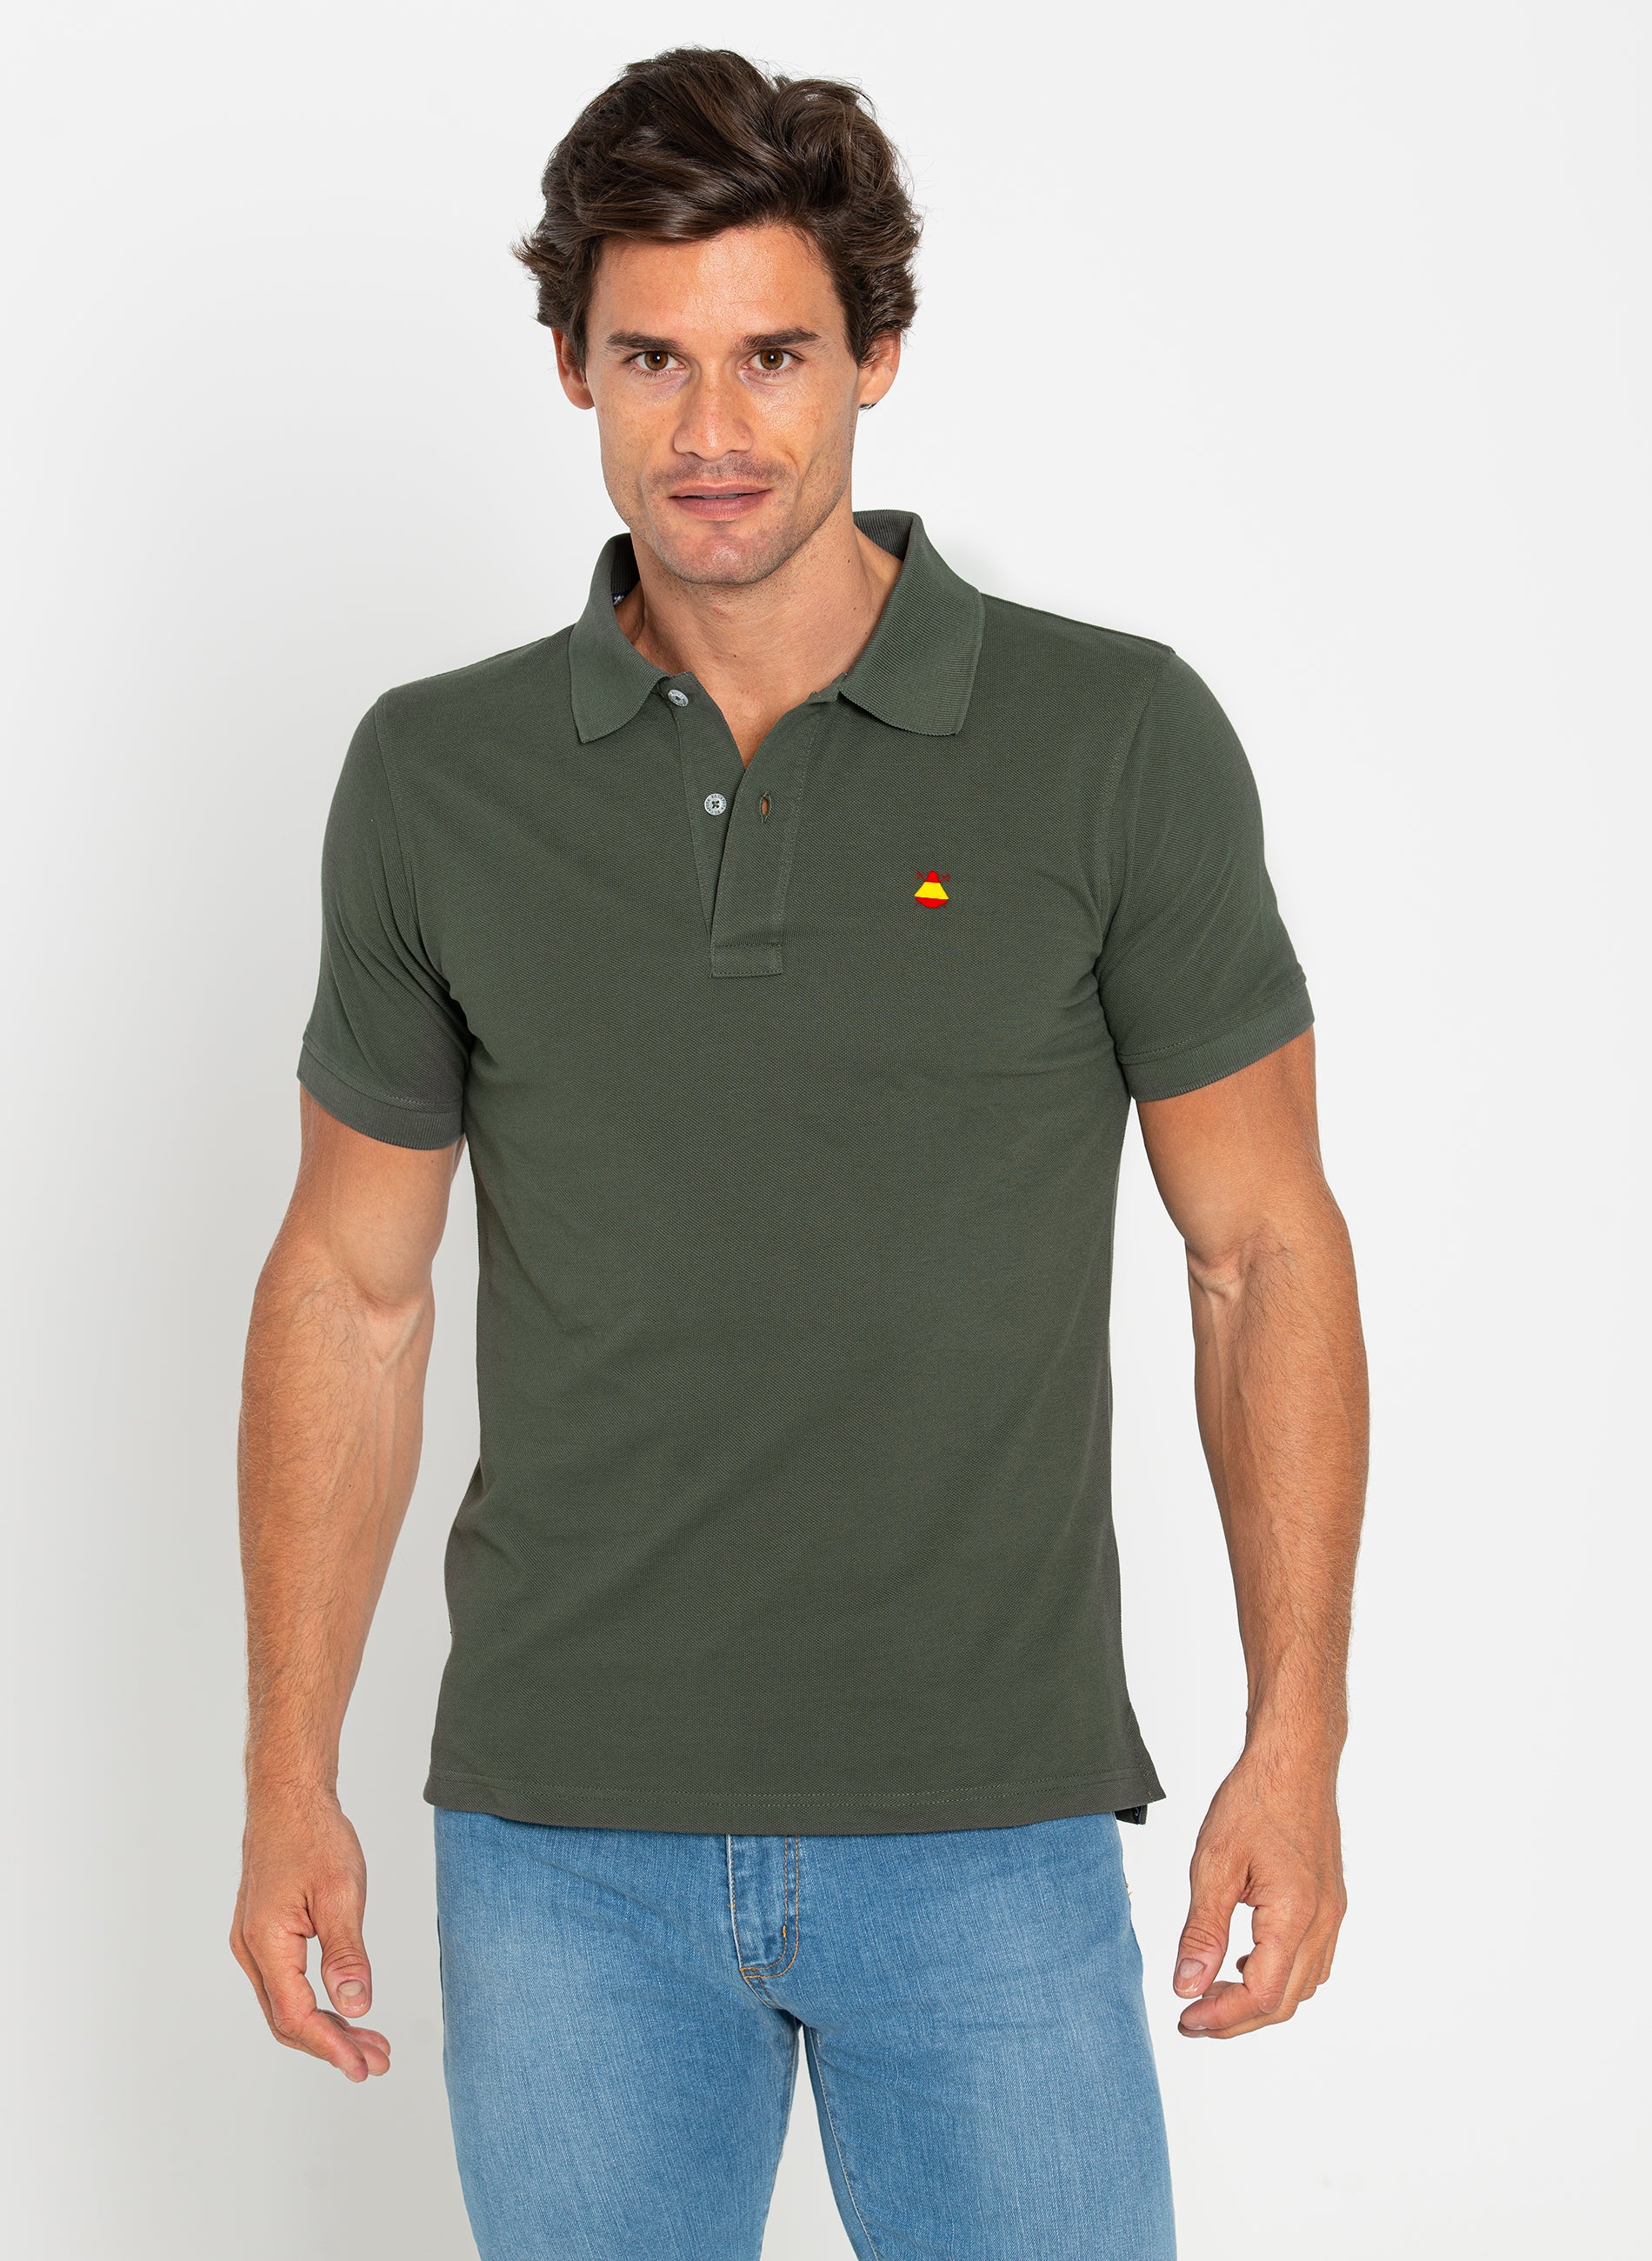 Polo Classic Forest Green Capote Spanien Herren